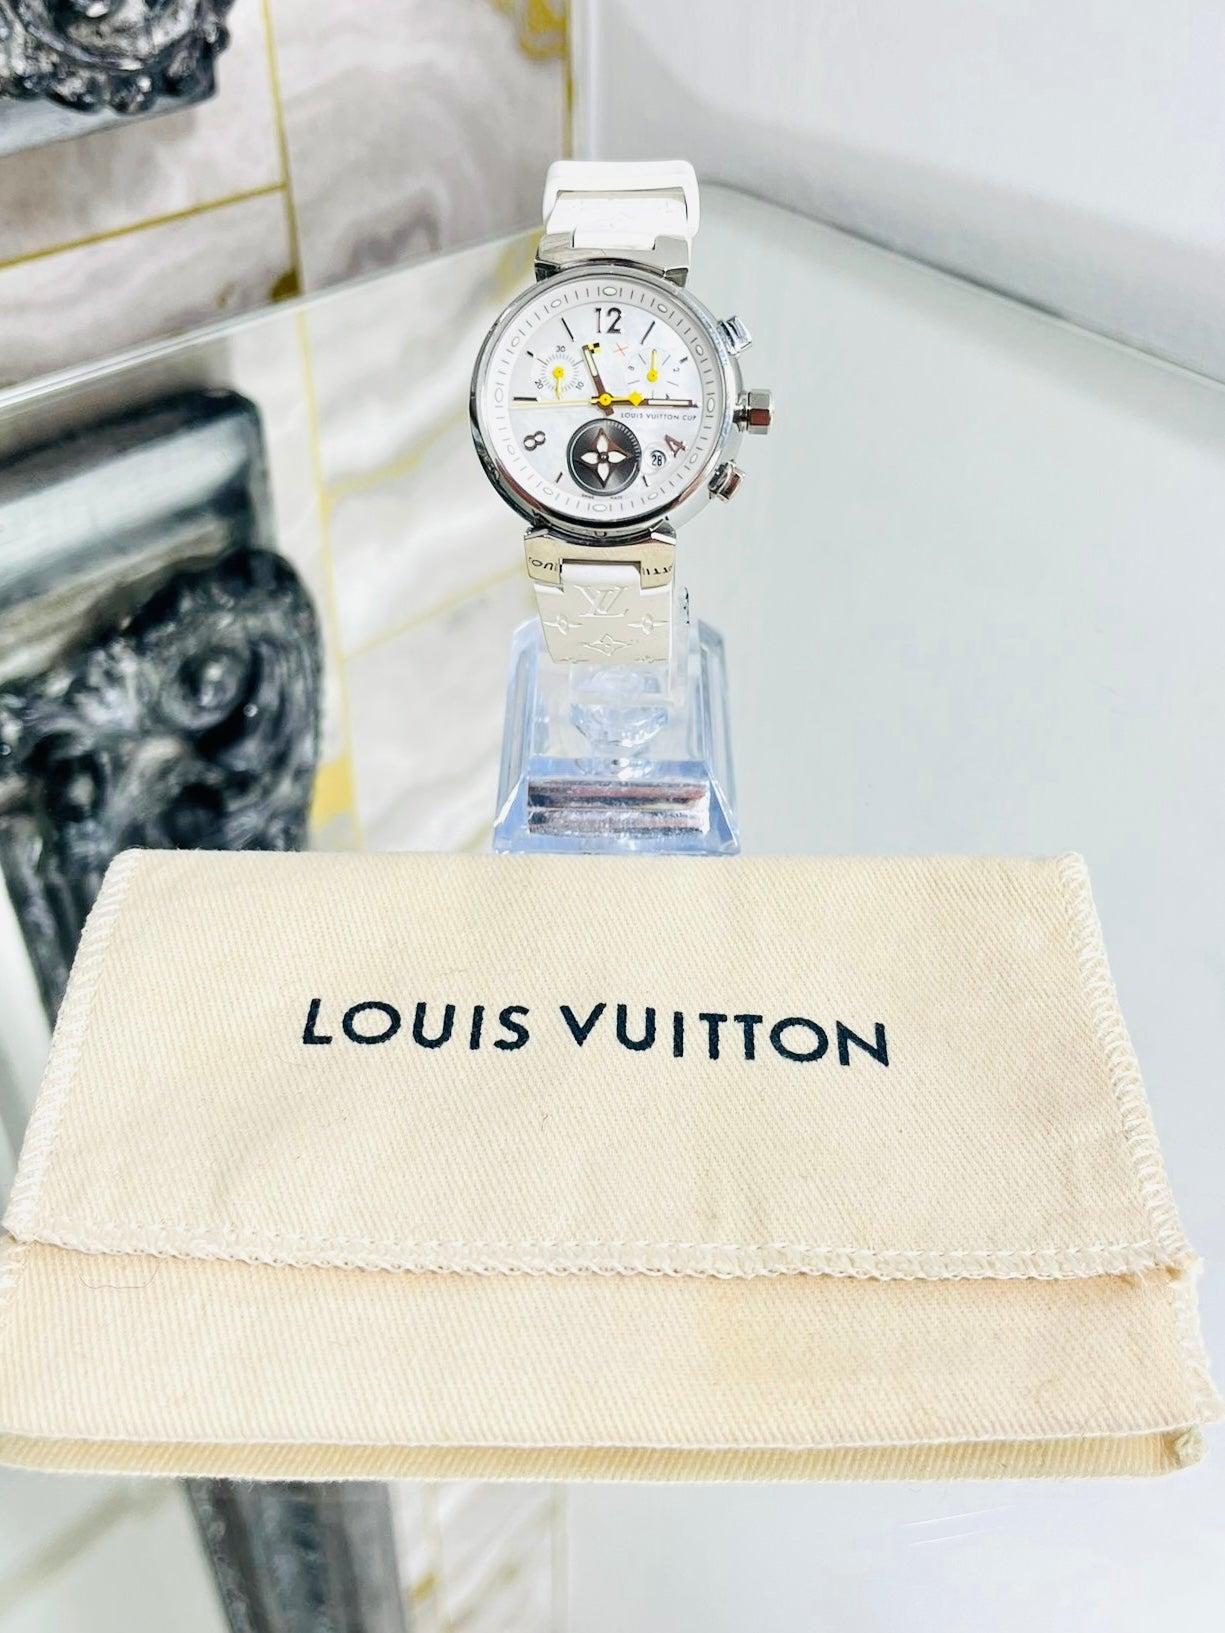 Louis Vuitton Tambour Chronograph Watch

Mother of pearl watch face set with in a stainless steel case.

Date display, chronograph dials,  LV motif dial. Outer Case is

engraved on the outer with 'Louis Vuitton'. Quartz movement.

'LV' logo and